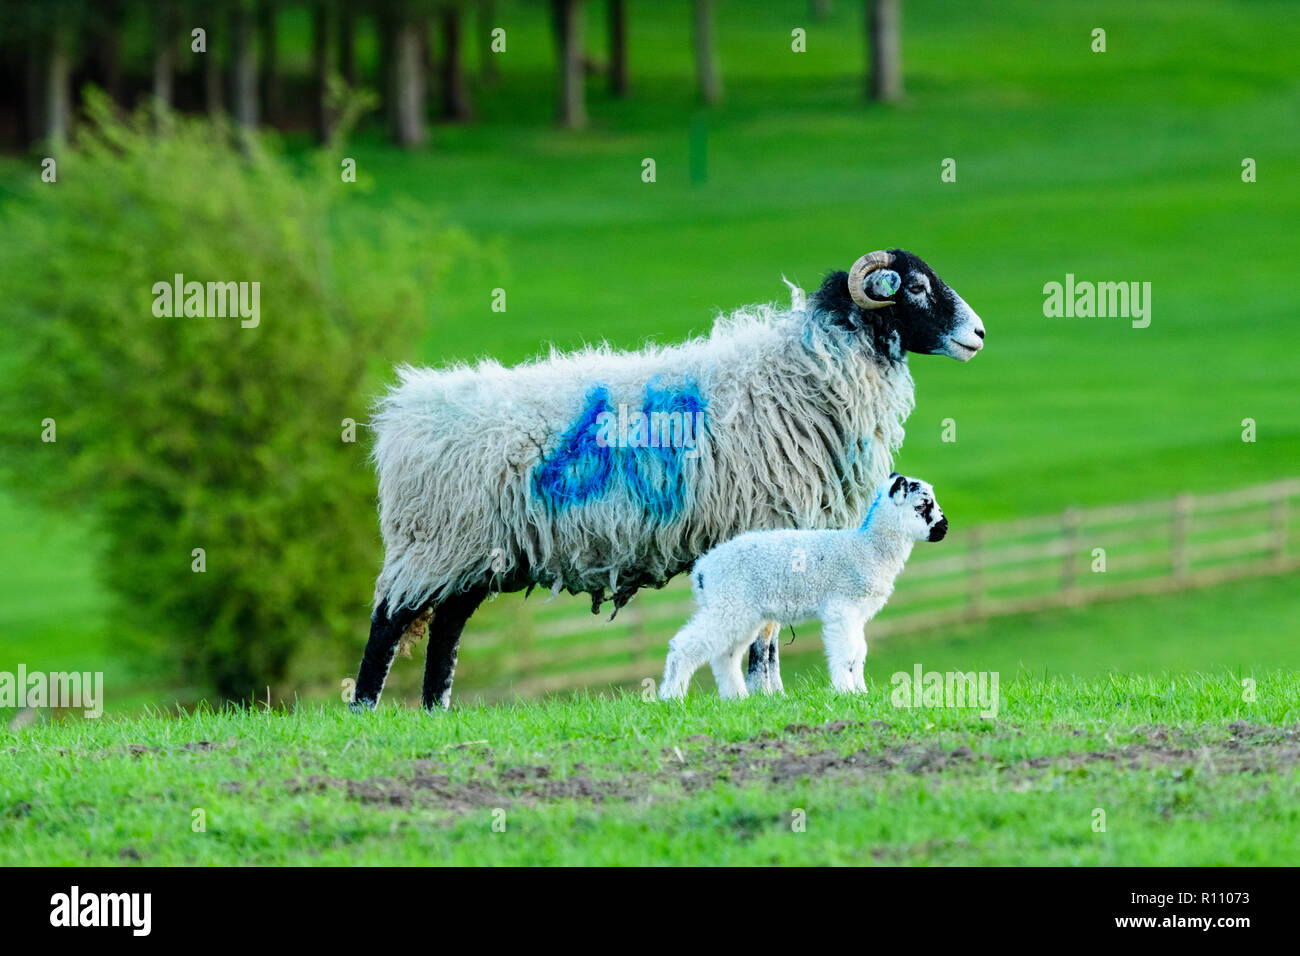 Close-up profile of 1 Swaledale sheep (ewe) & cute lamb standing together in a farm field in springtime. Yorkshire, England, GB, UK. Stock Photo